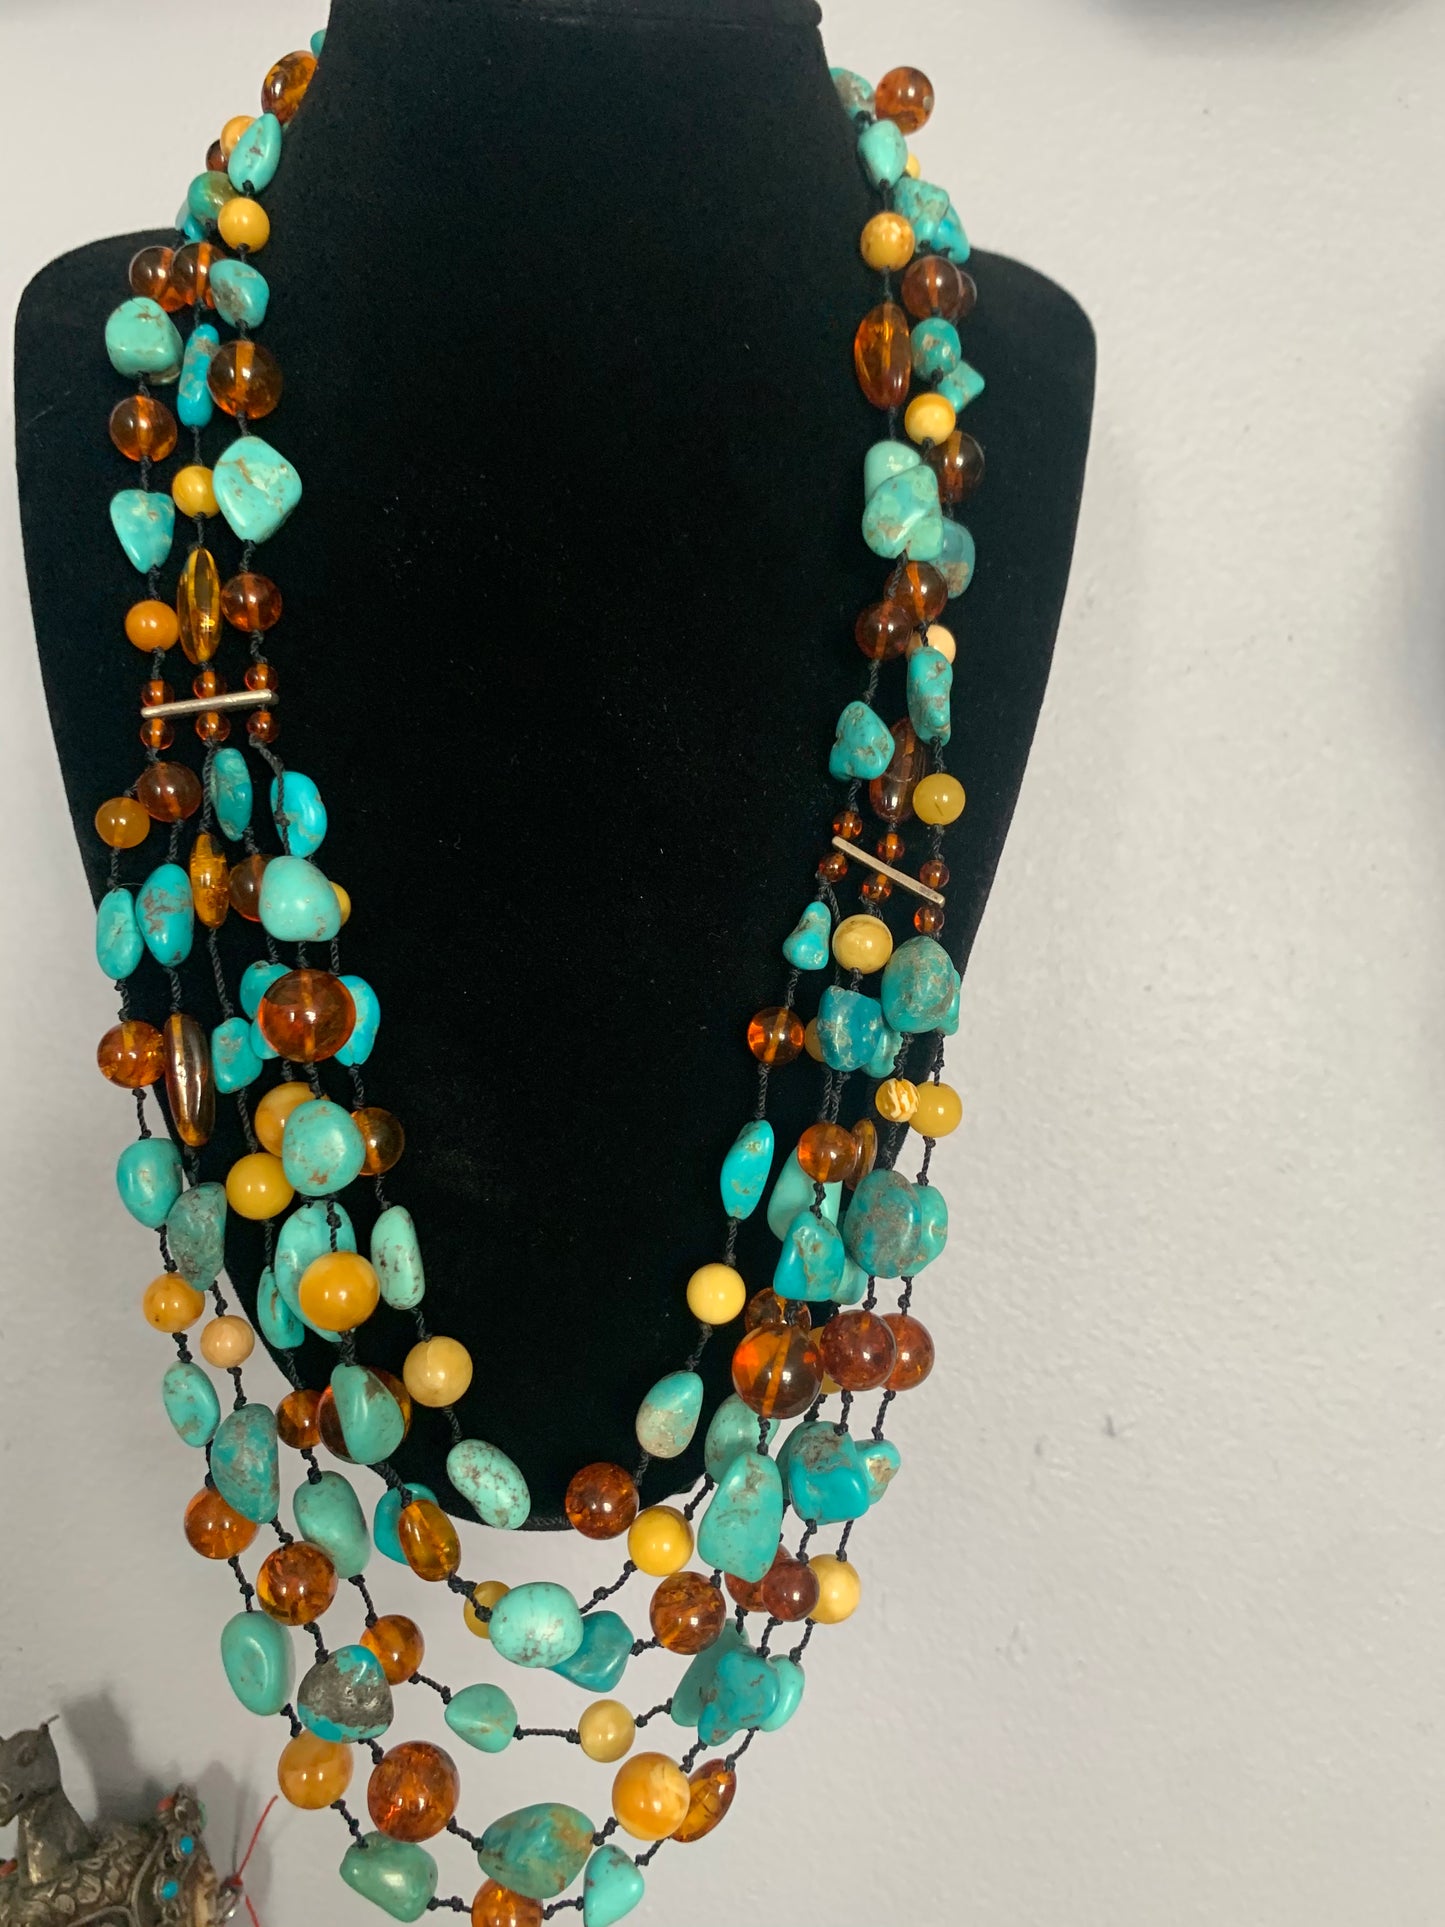 A turquoise and amber necklace